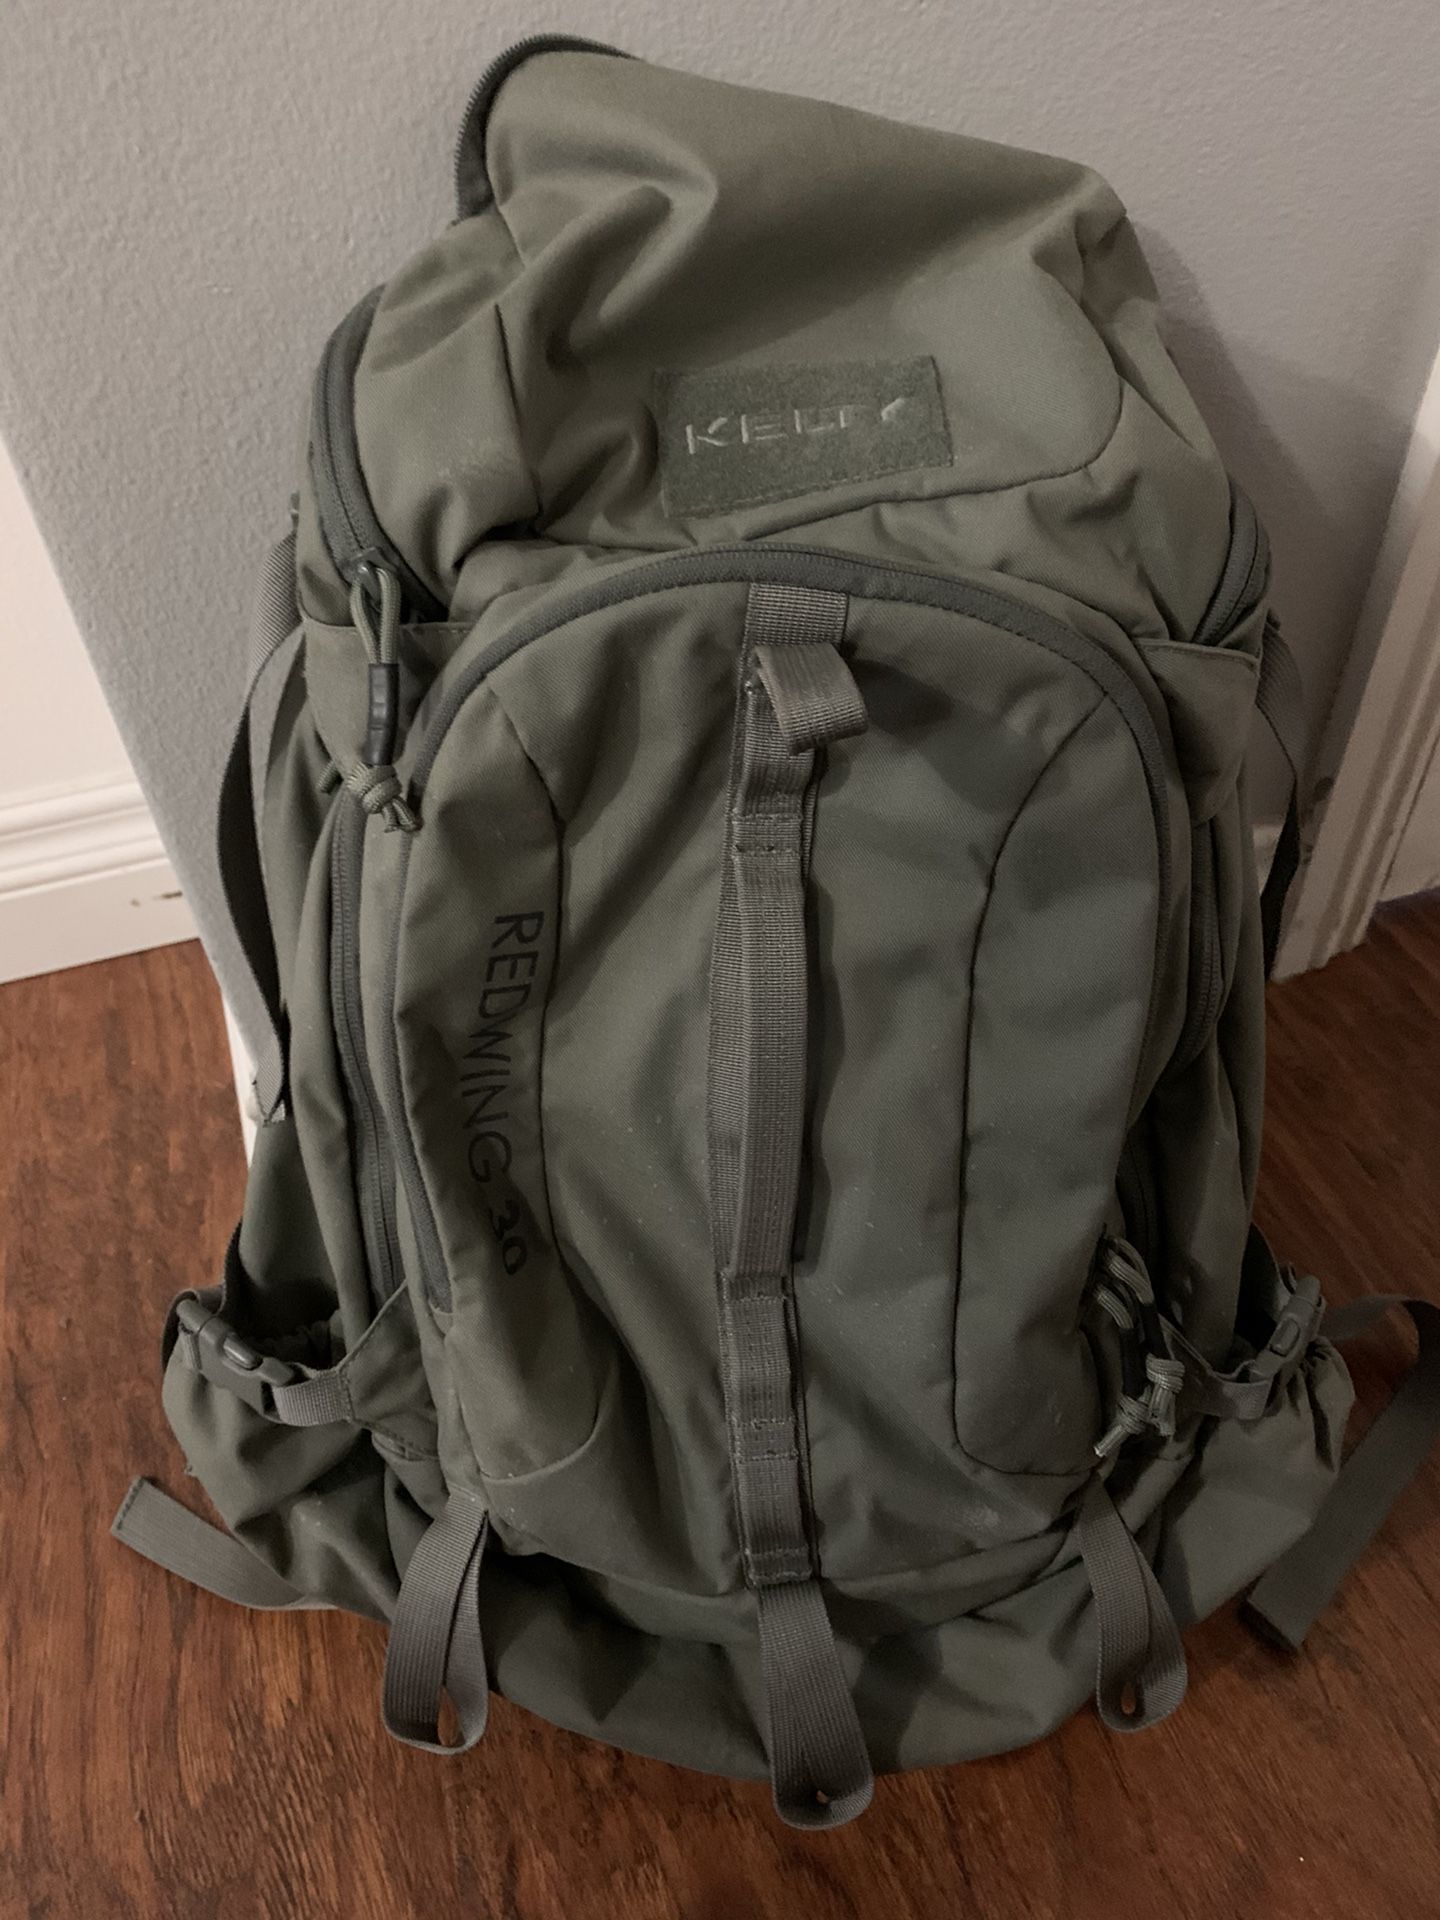 Kelty Redwing Backpack for Hiking Camping Travel Adventure